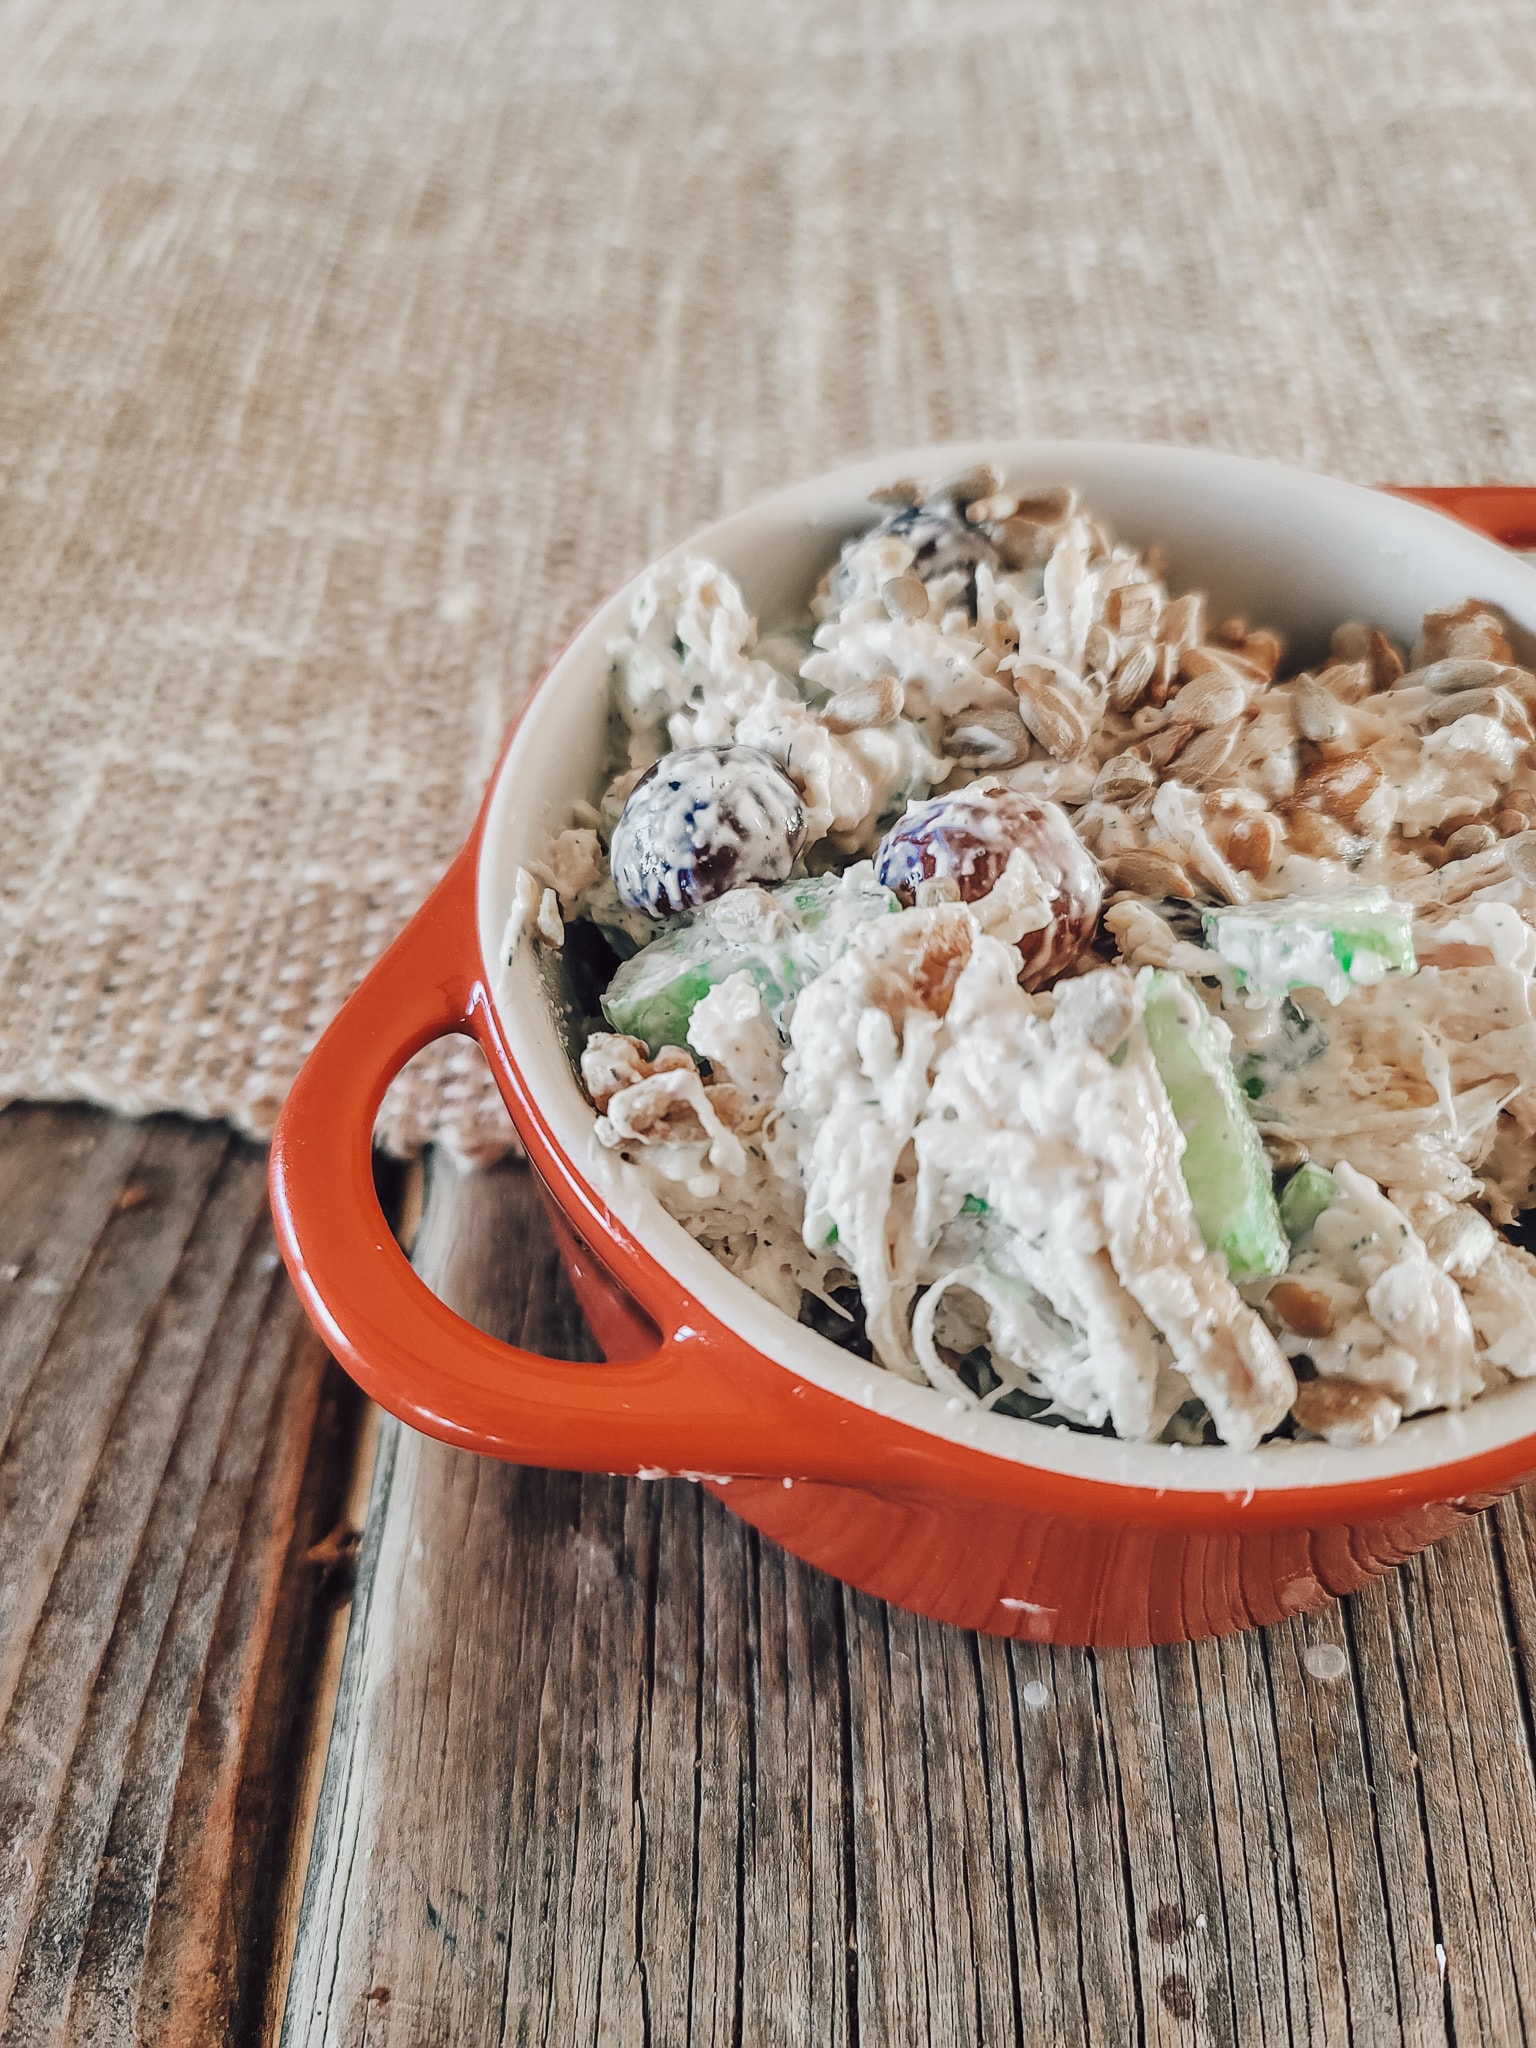  Top with walnuts or almonds. Chill in the refrigerator for at least two hours or until ready to serve. Low Carb Chicken Salad